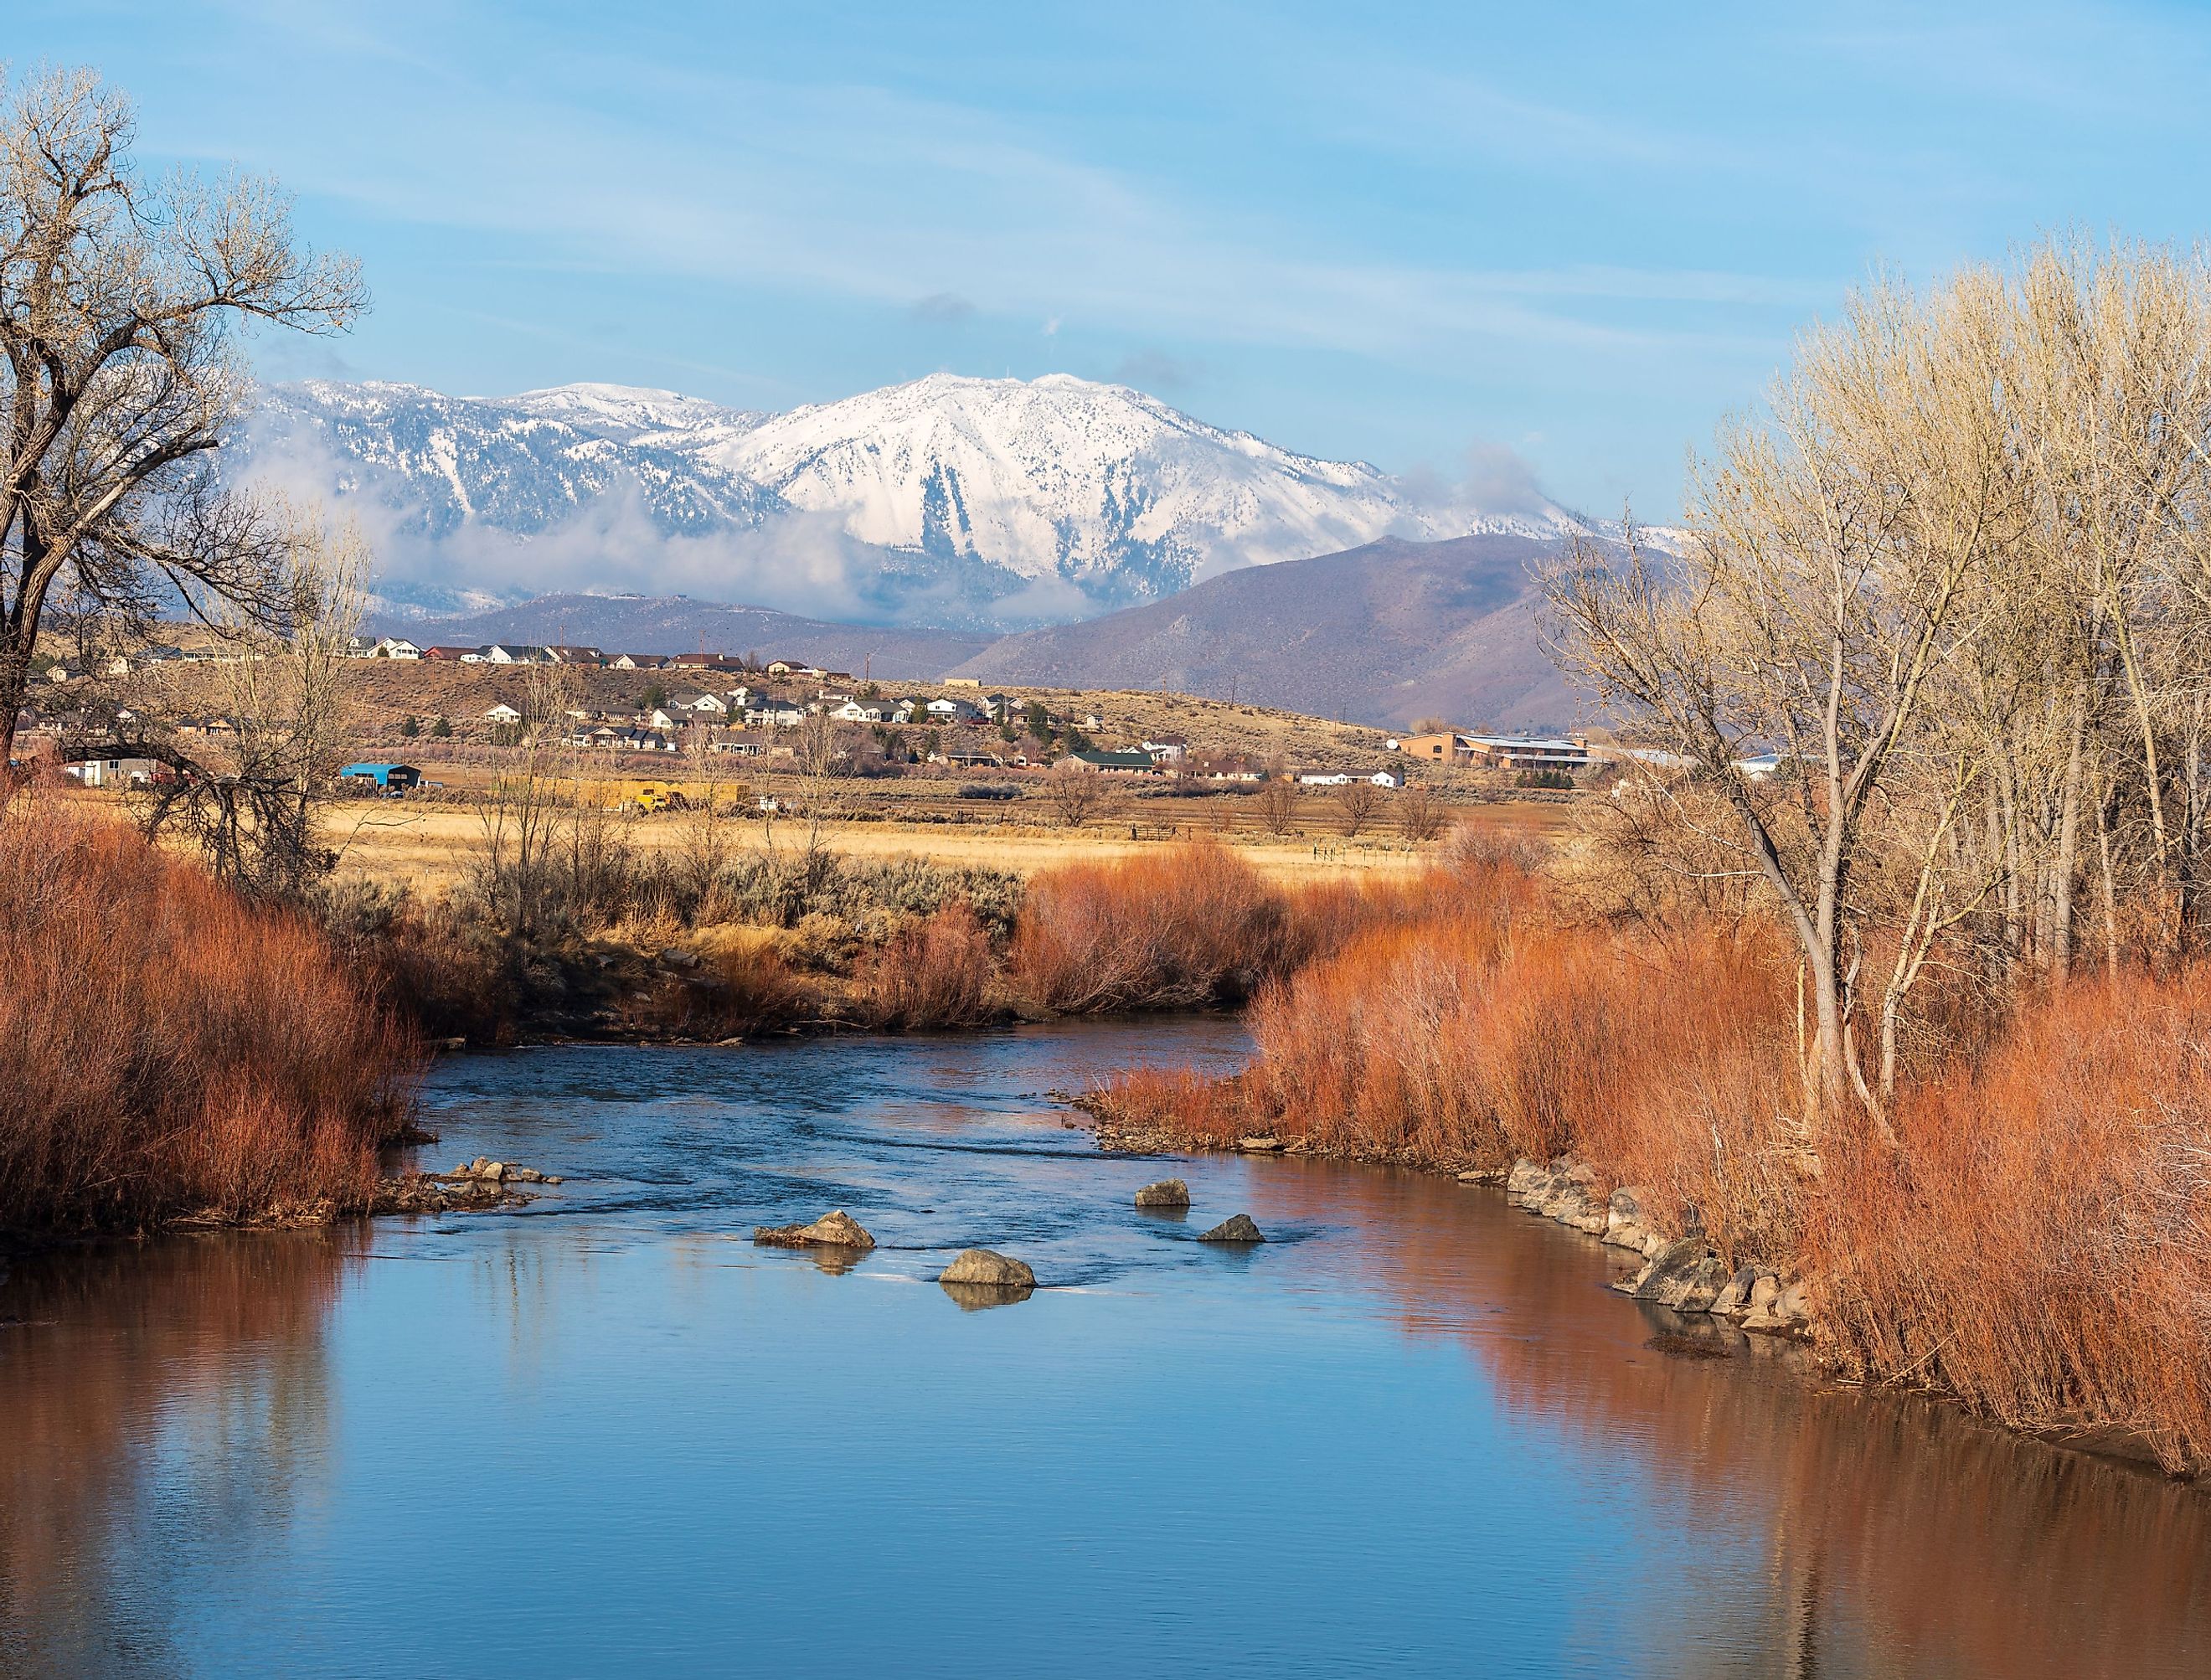 Landscape of Carson River and the Sierra Nevada Mountains in Carson City, Nevada. Image credit Angela Dukich via shutterstock